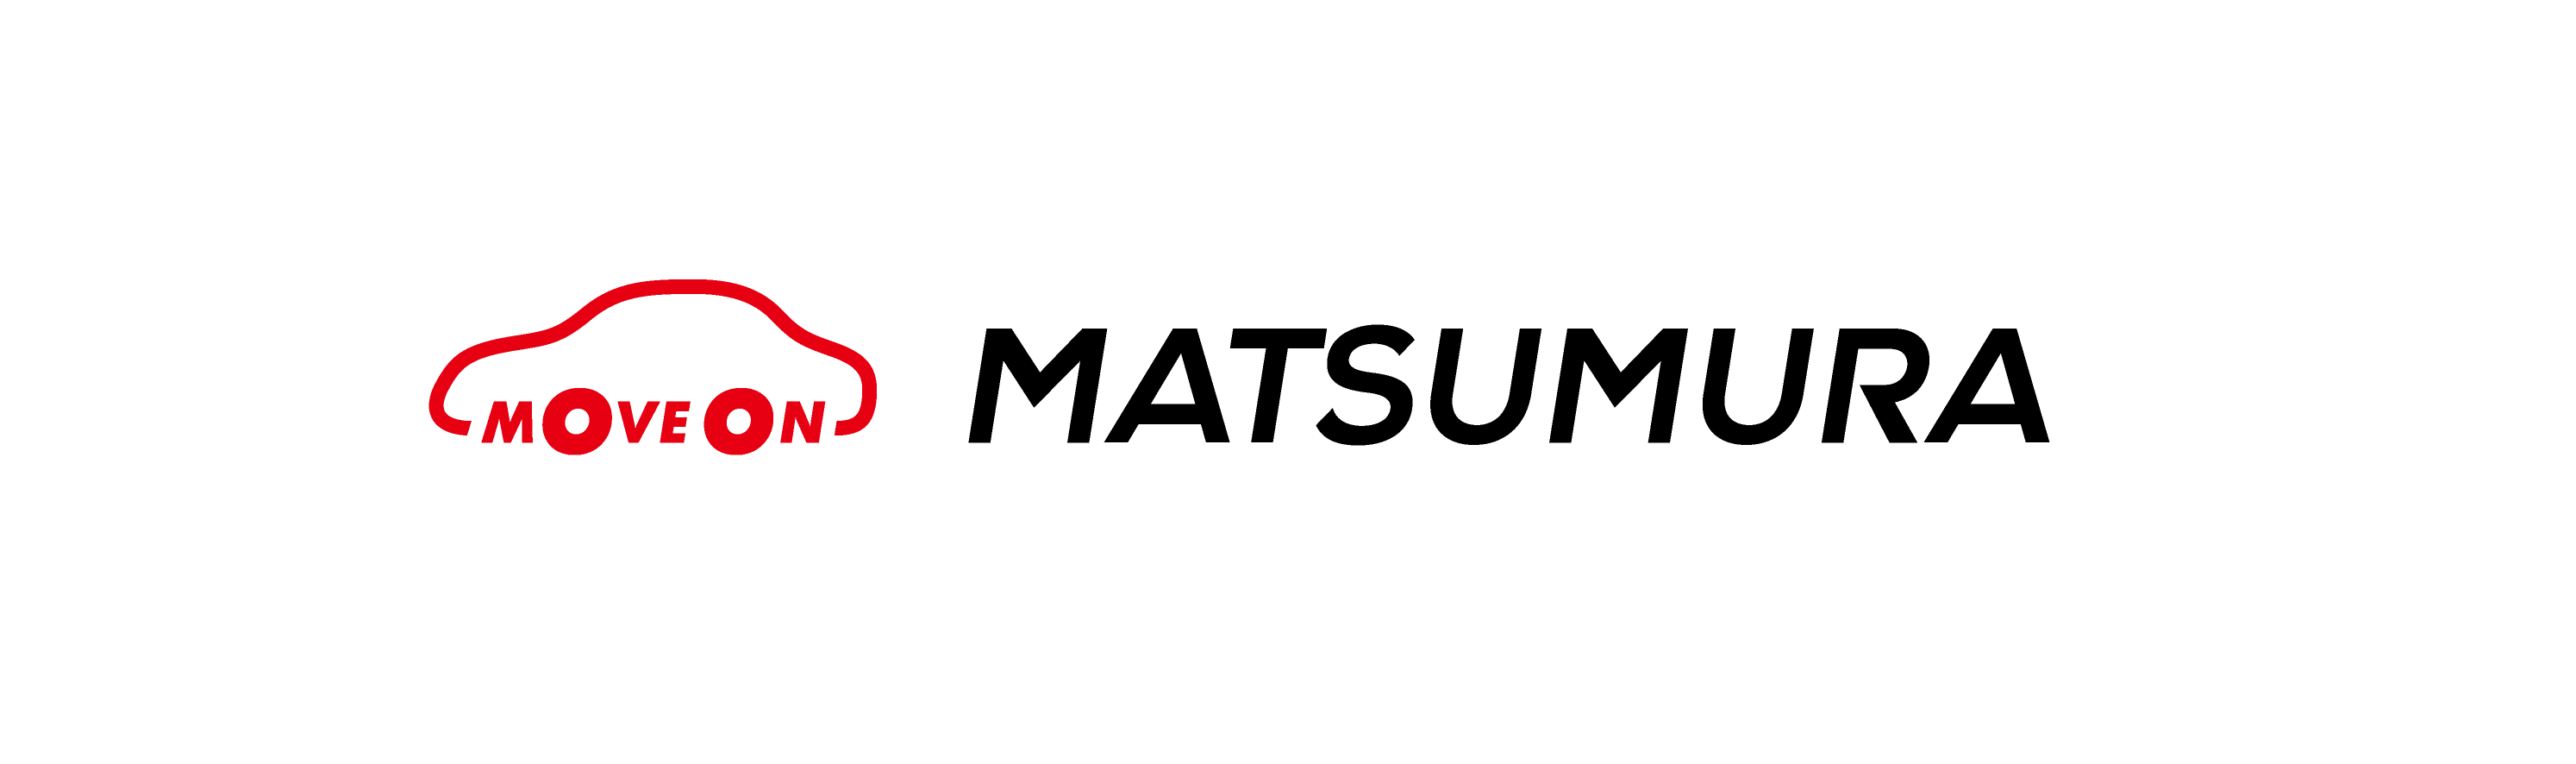 MATSUMURA is a global company in  aluminum　casting industry